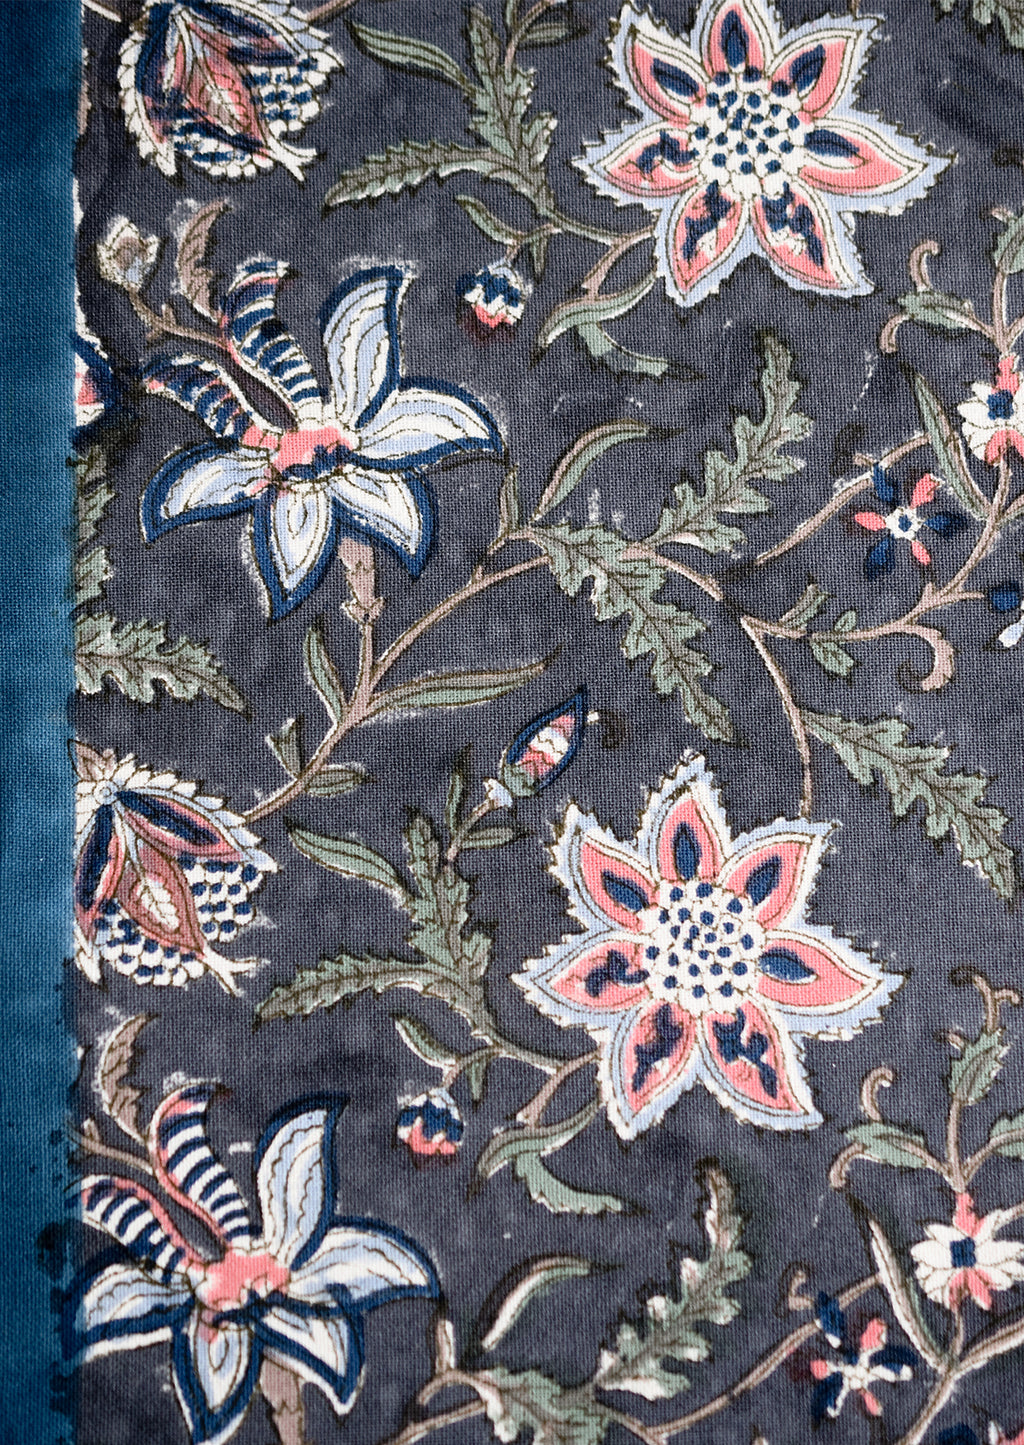 2: Navy blue floral print fabric.